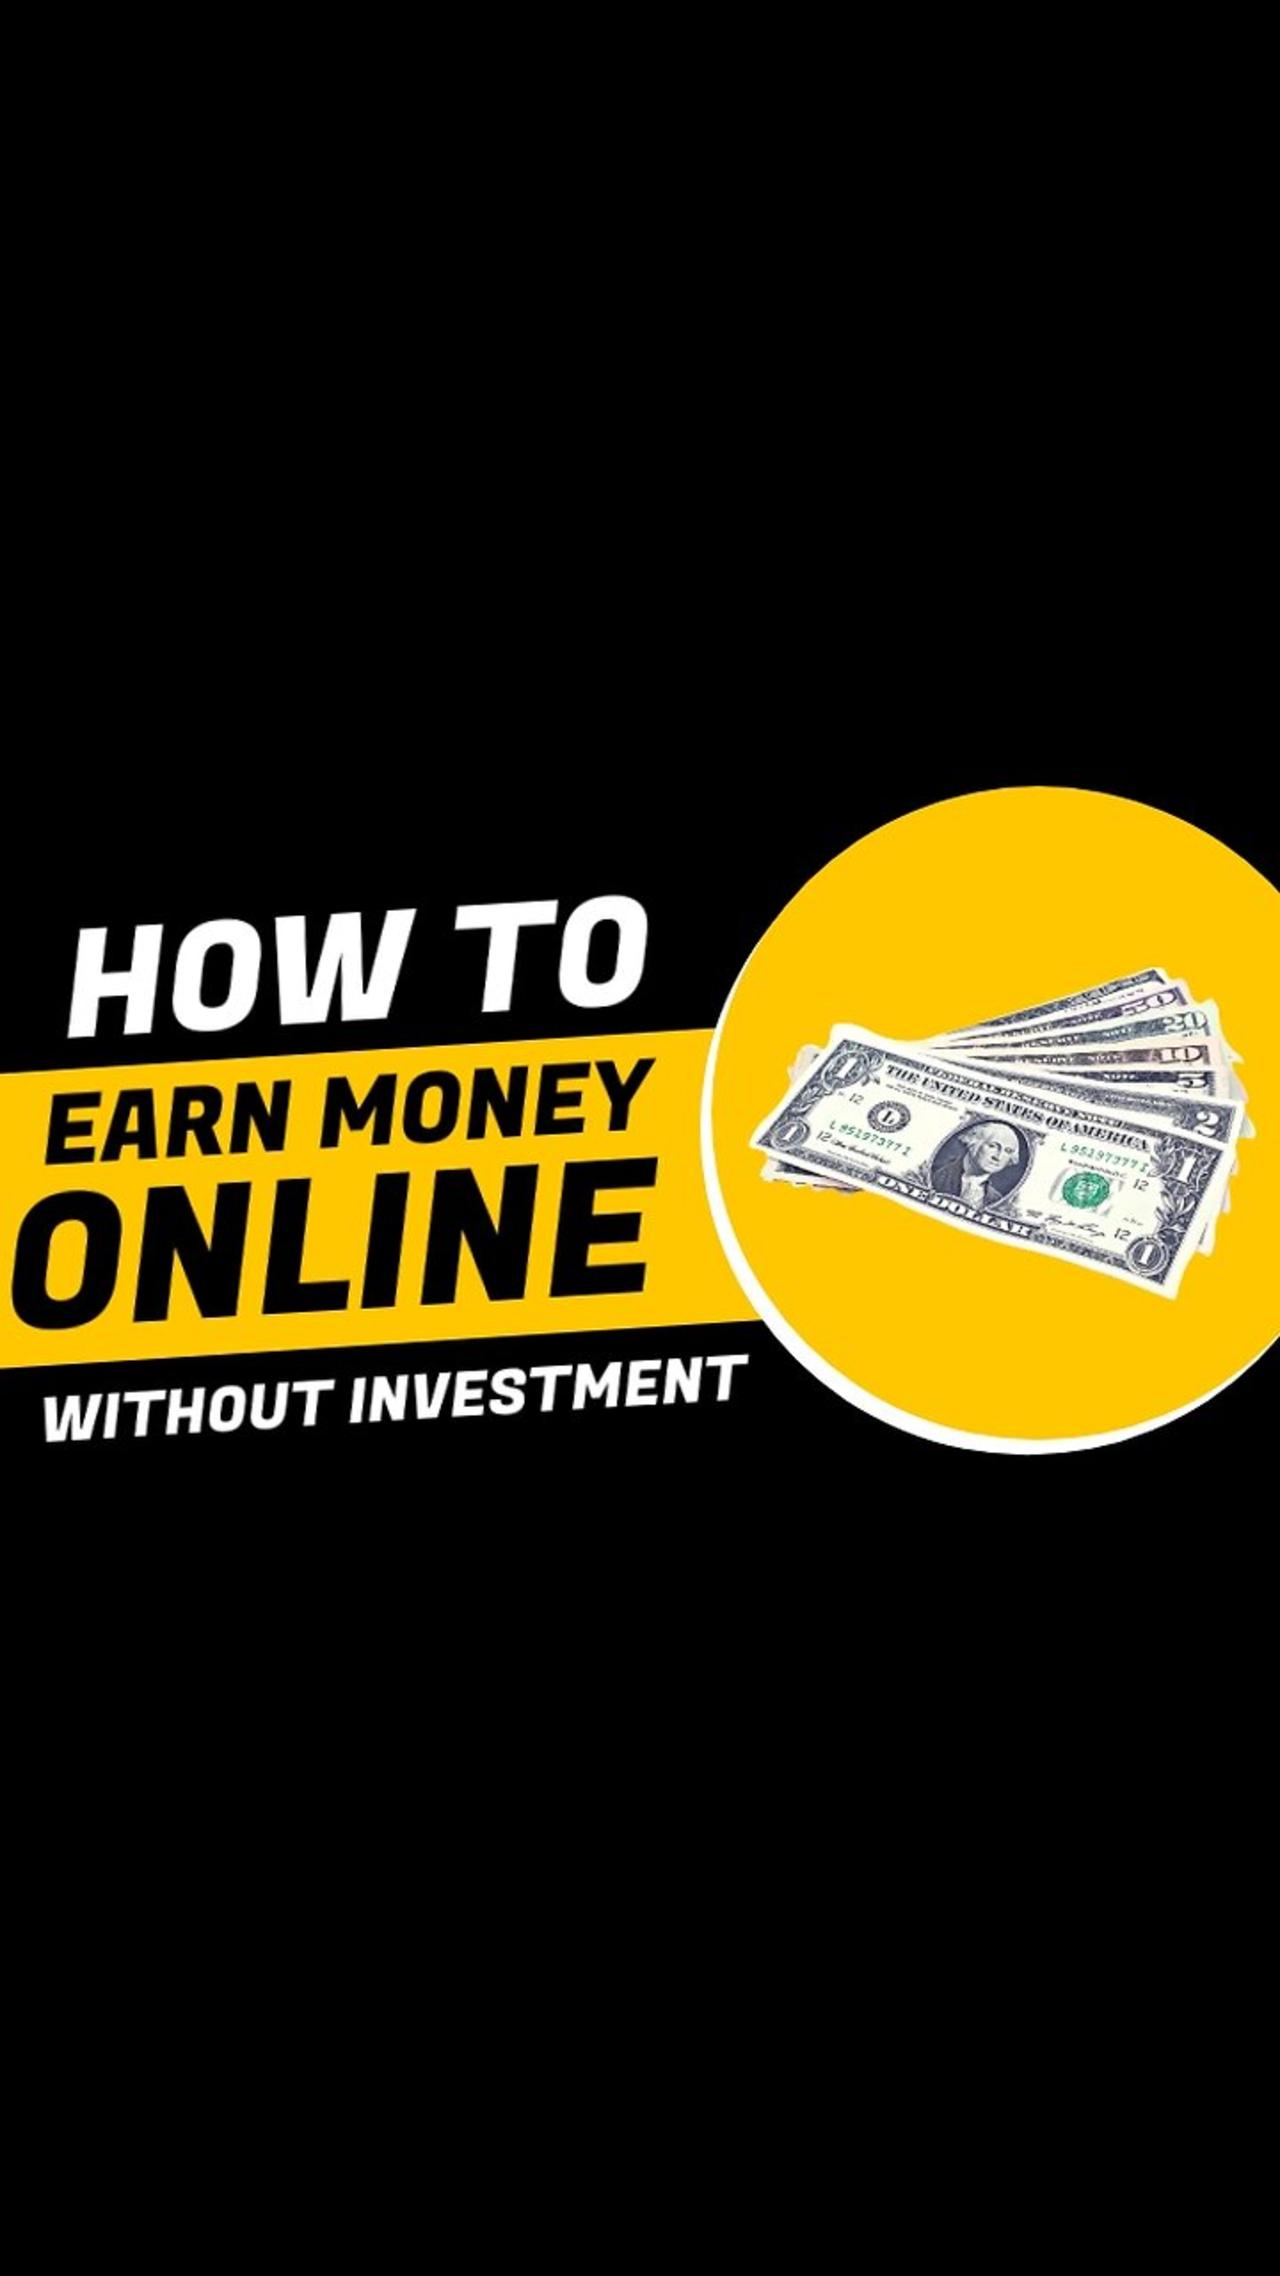 How to Make Money Online - Tips and Tricks!